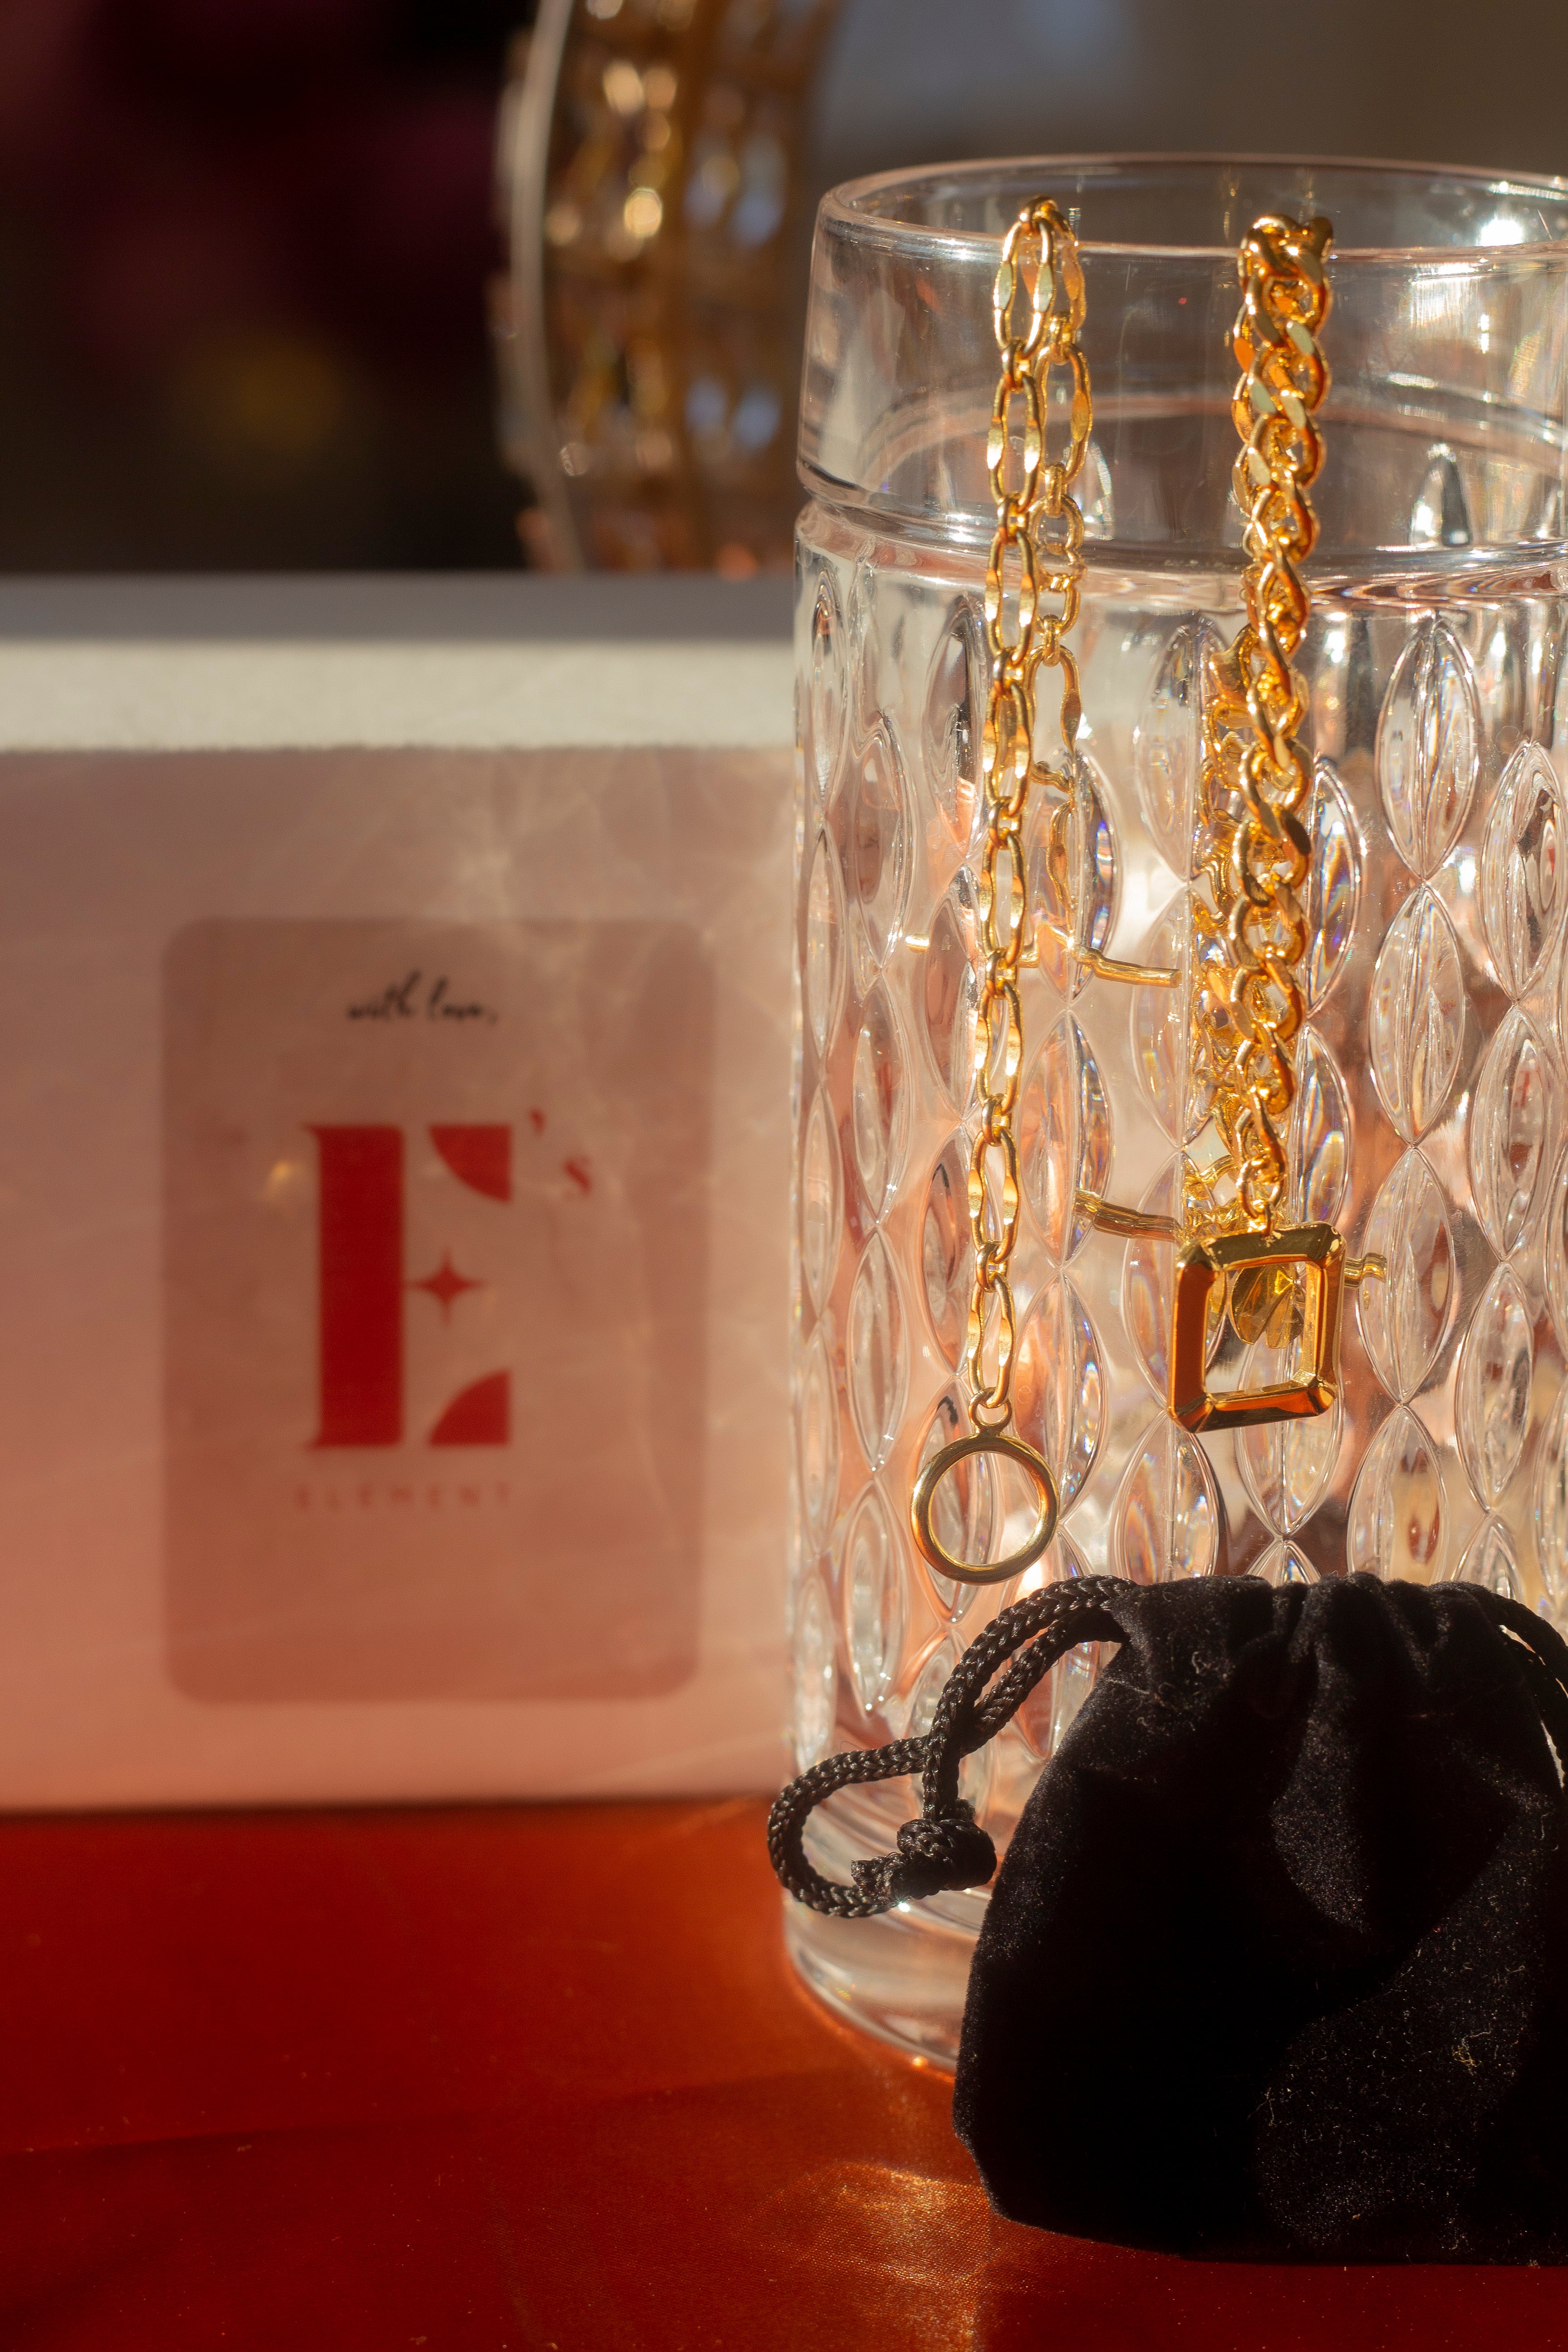 18k gold chain bracelet hanging on the edge of a class cup. Ella Chunky Charm Bracelet by E's Element.